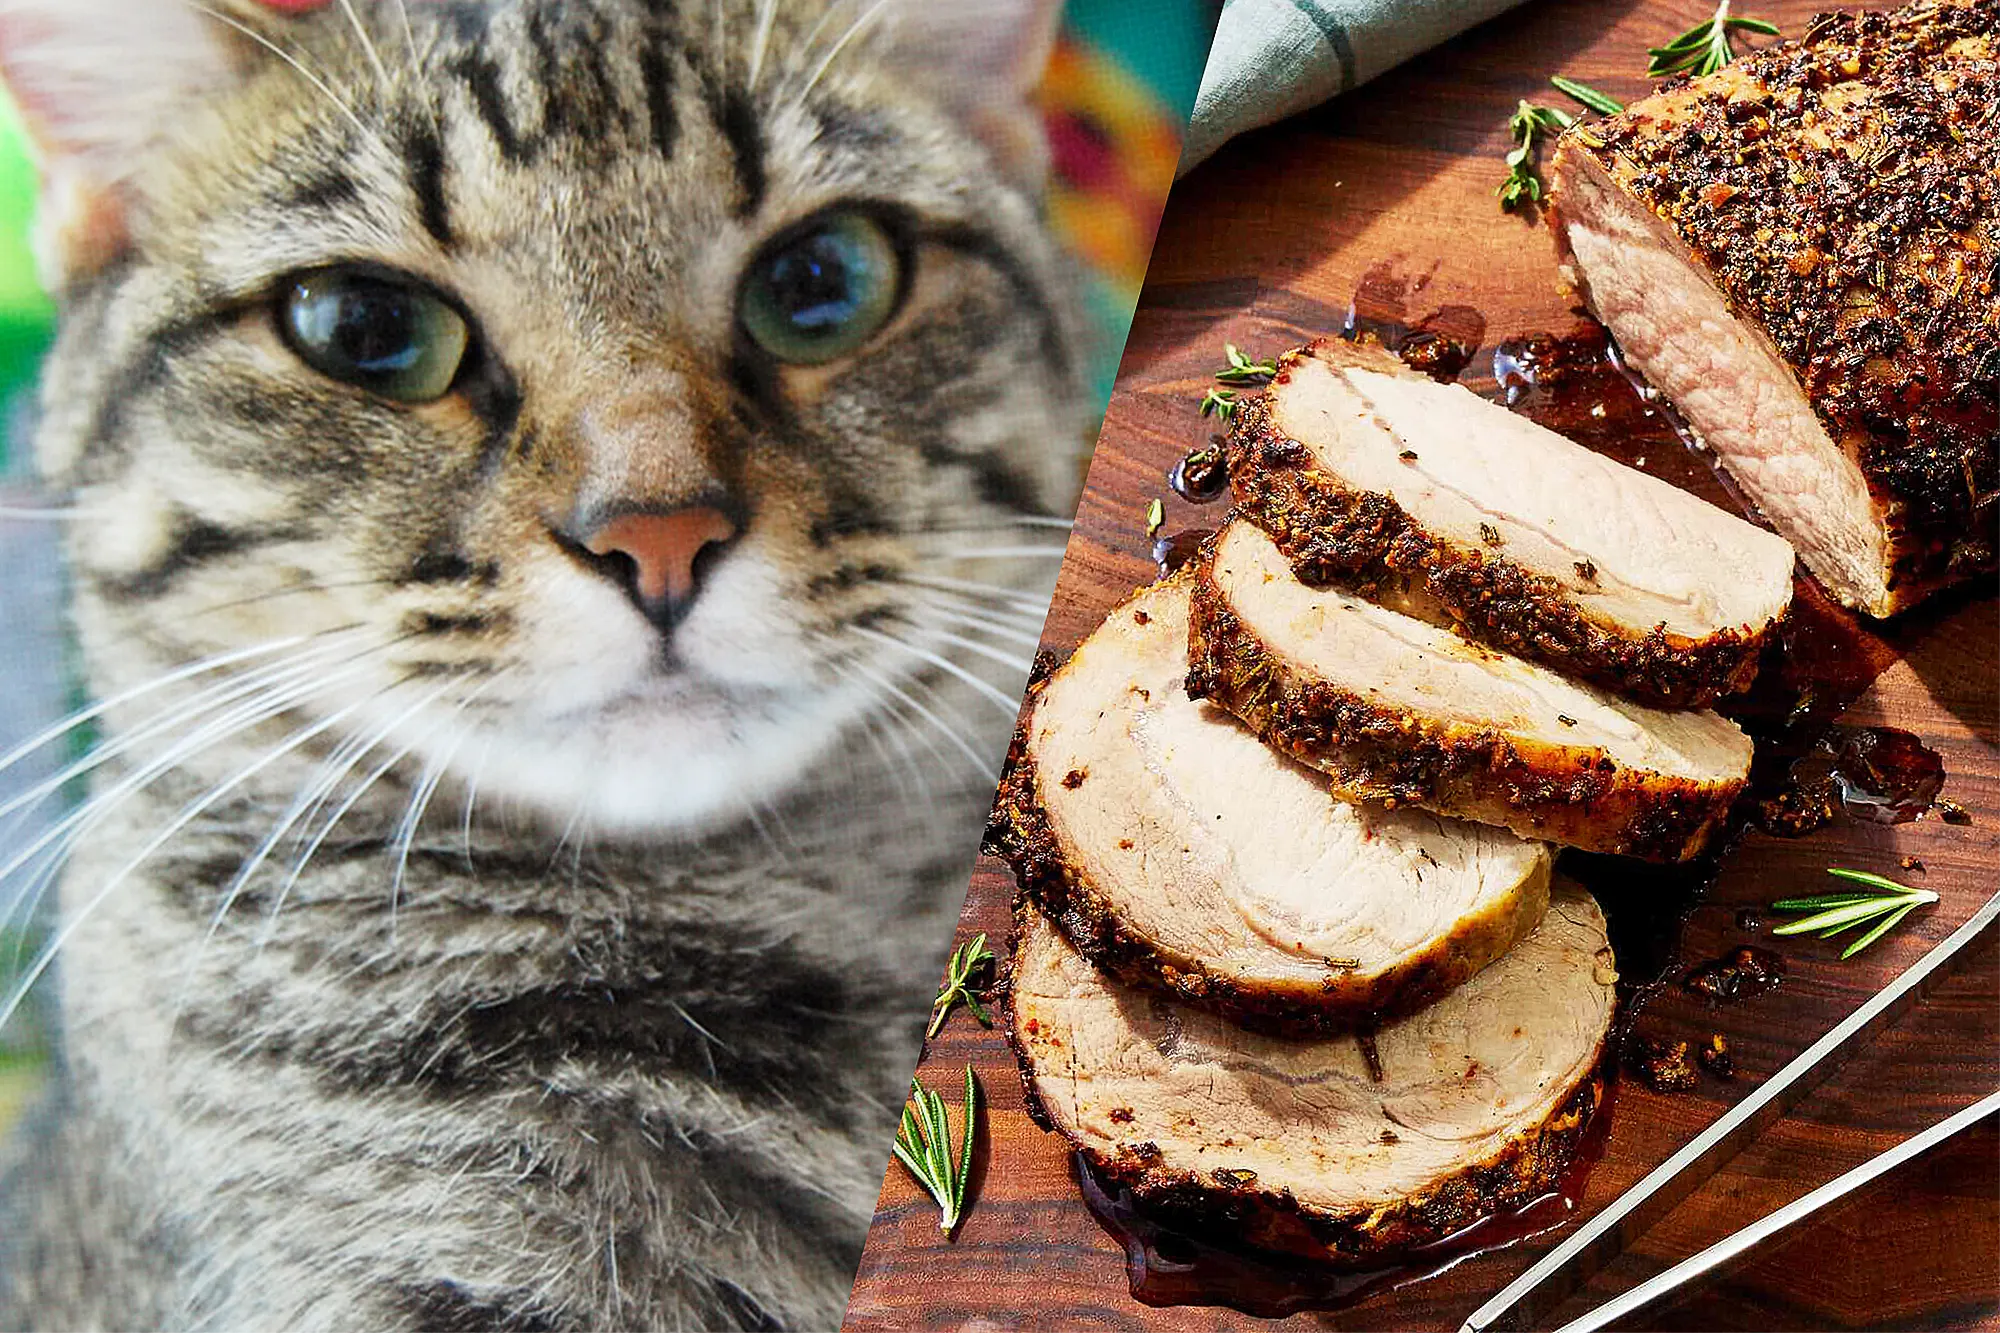 Can Cats Eat Pork?